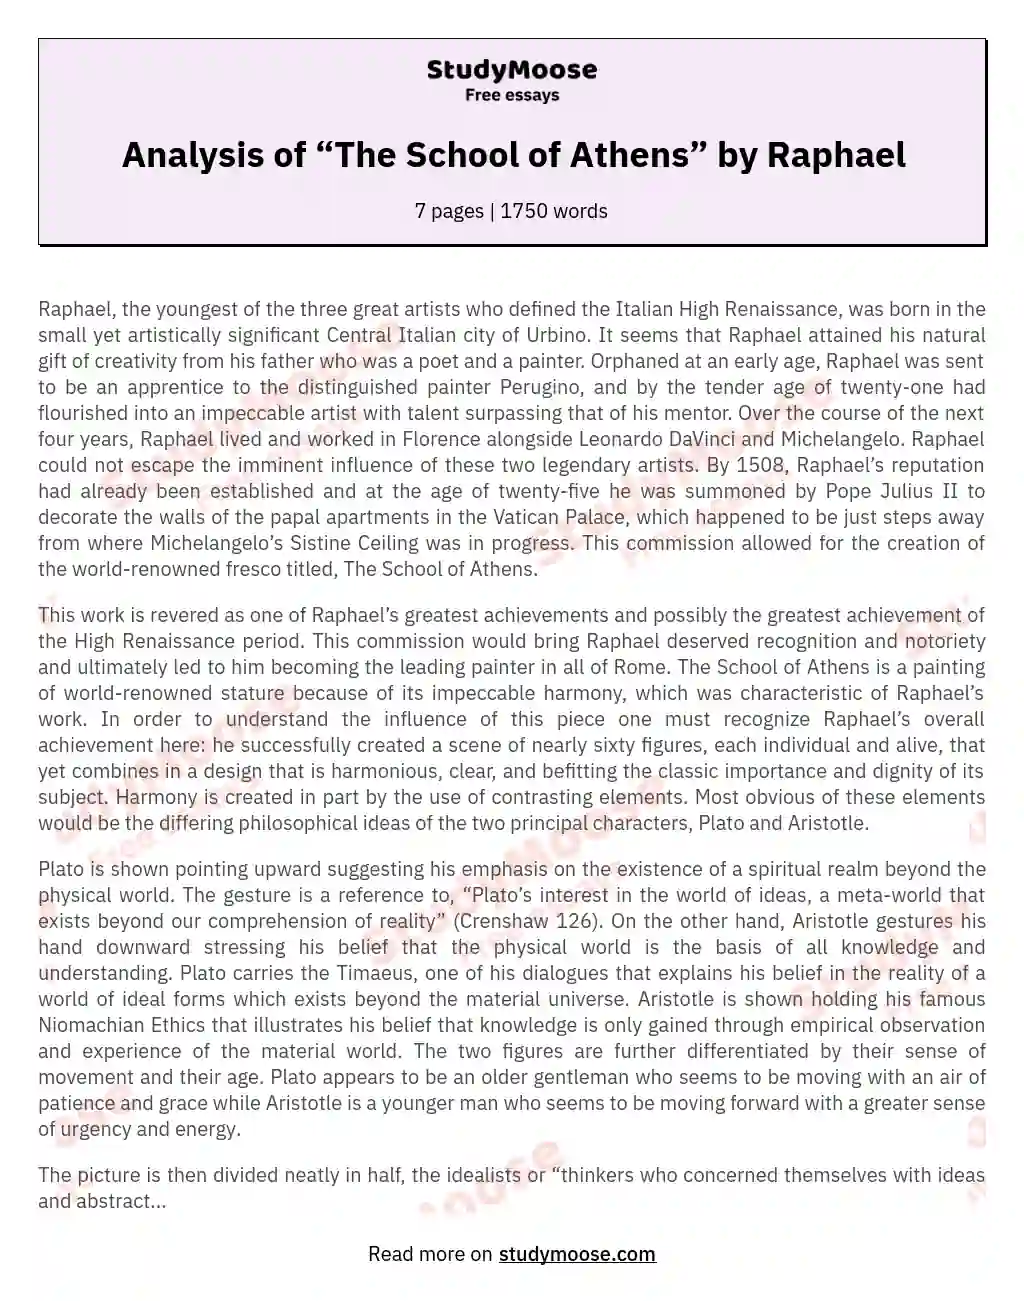 Analysis of “The School of Athens” by Raphael